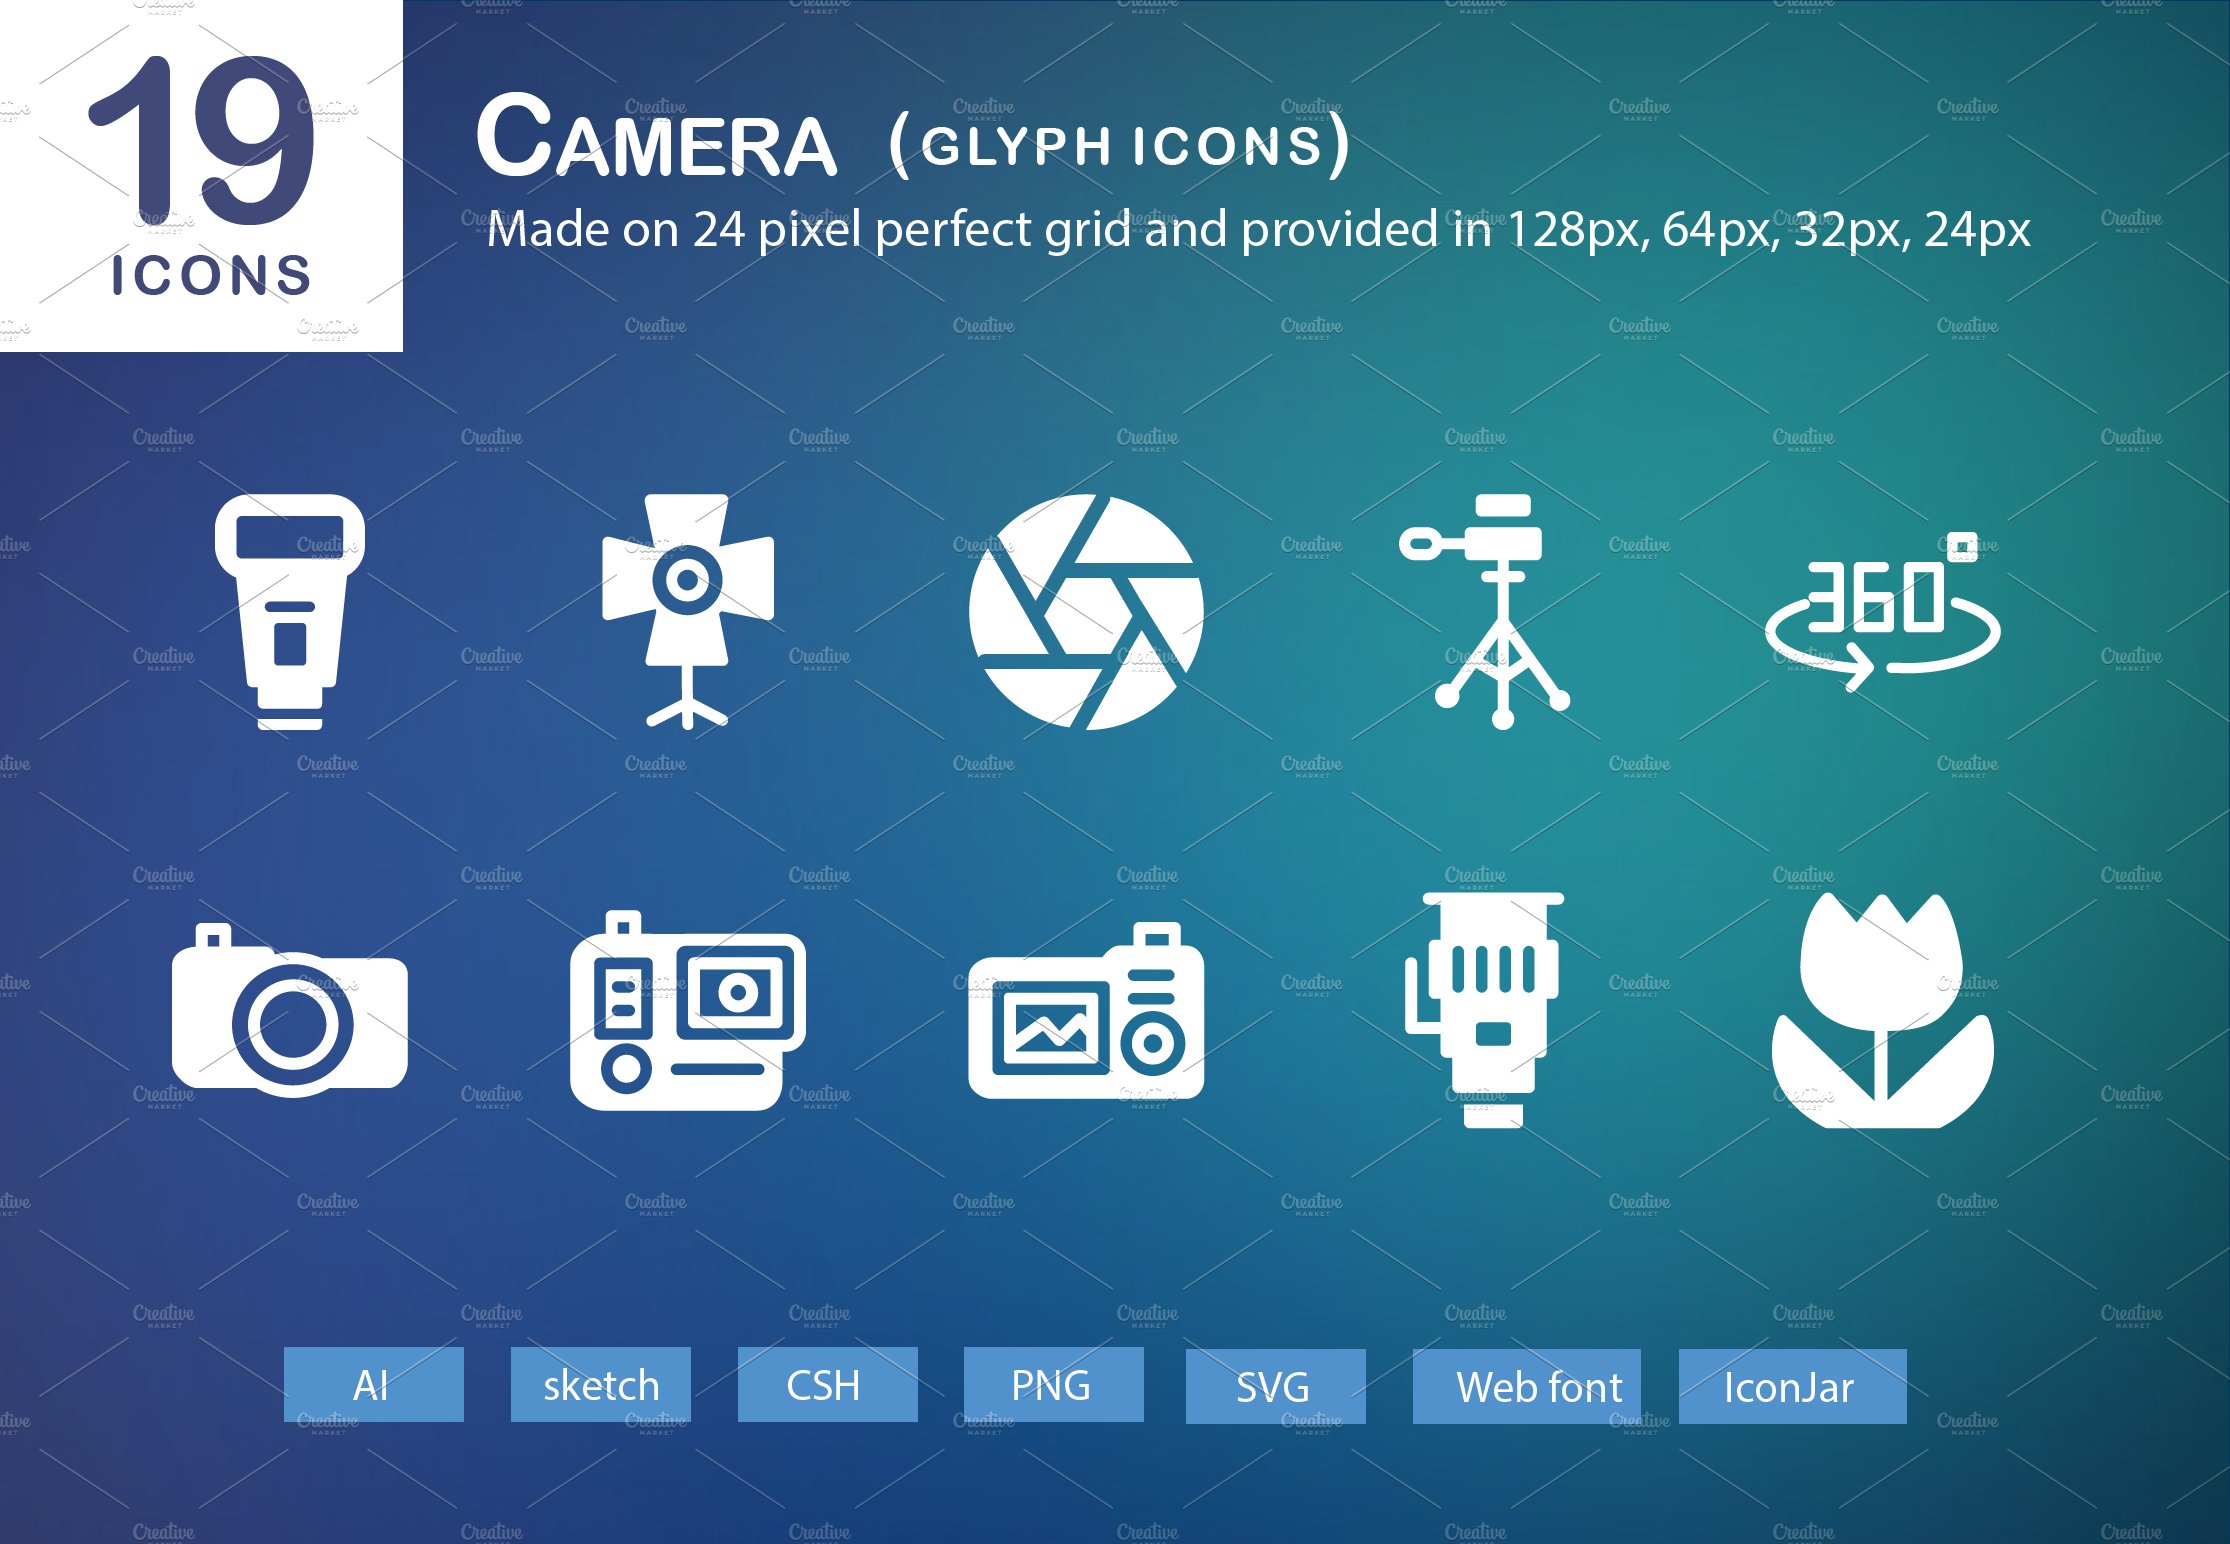 19 Camera Glyph Icons cover image.